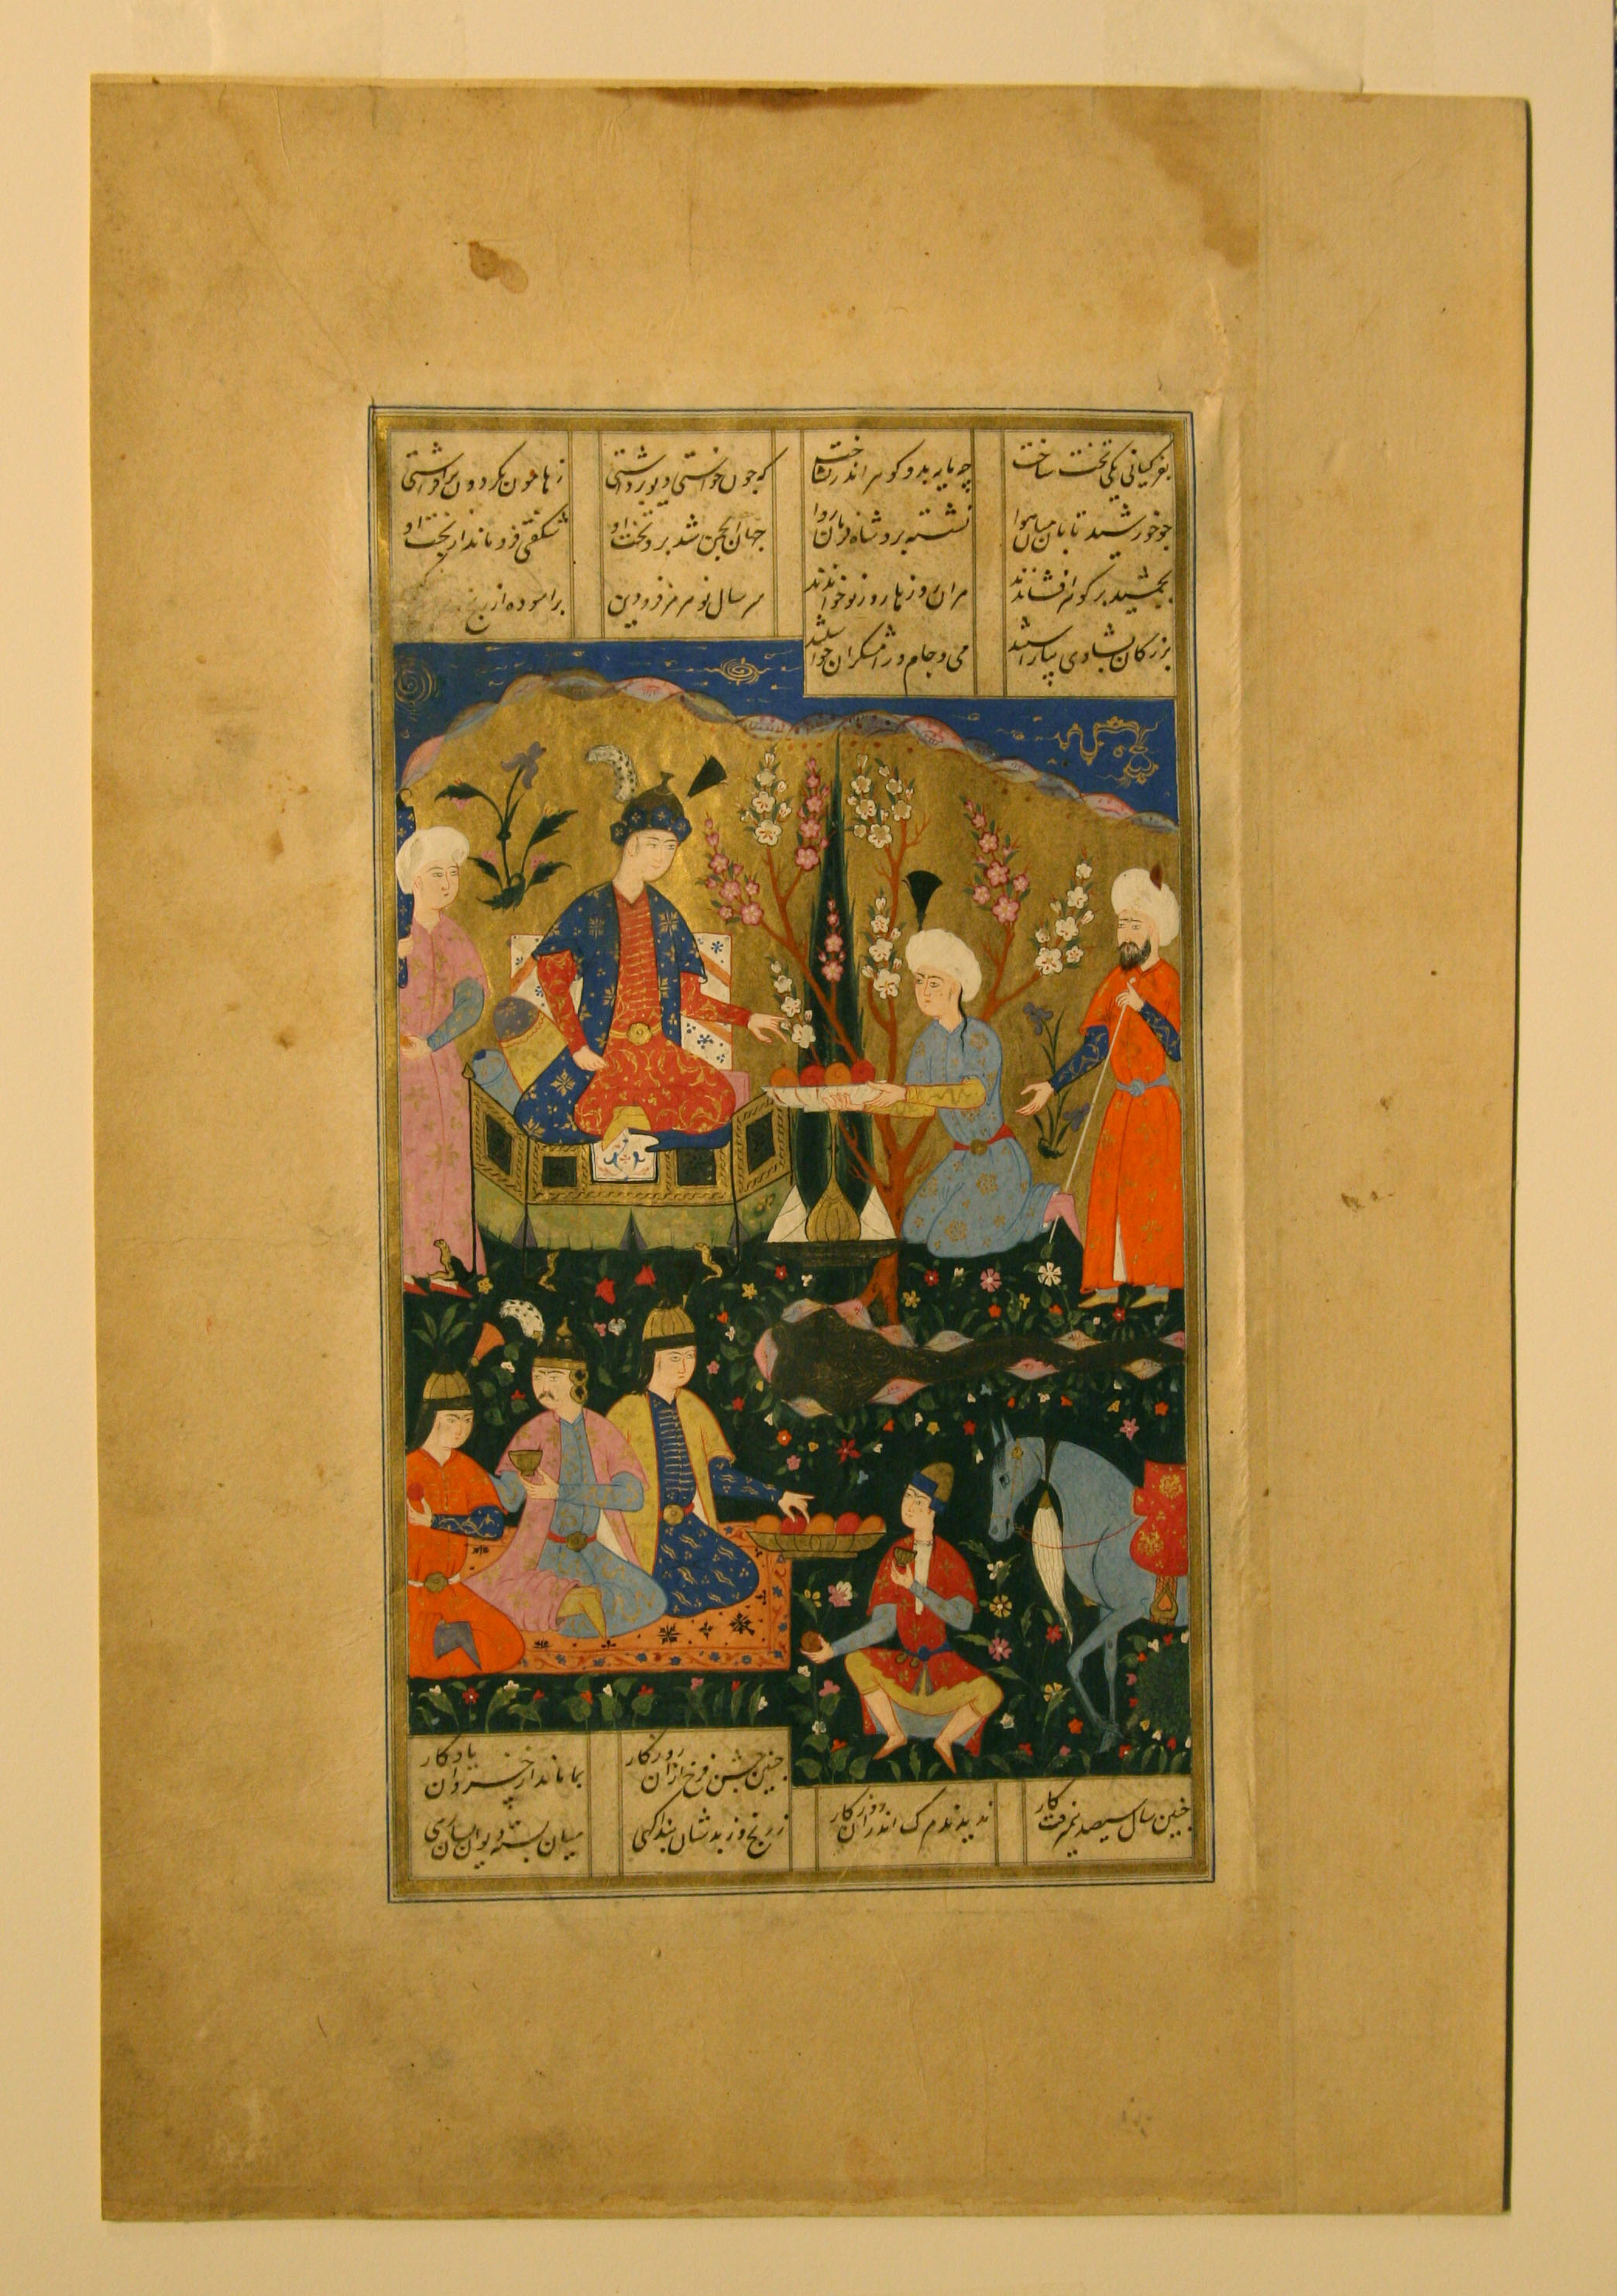 Safavid Persian Miniature Painting from the Shahnameh